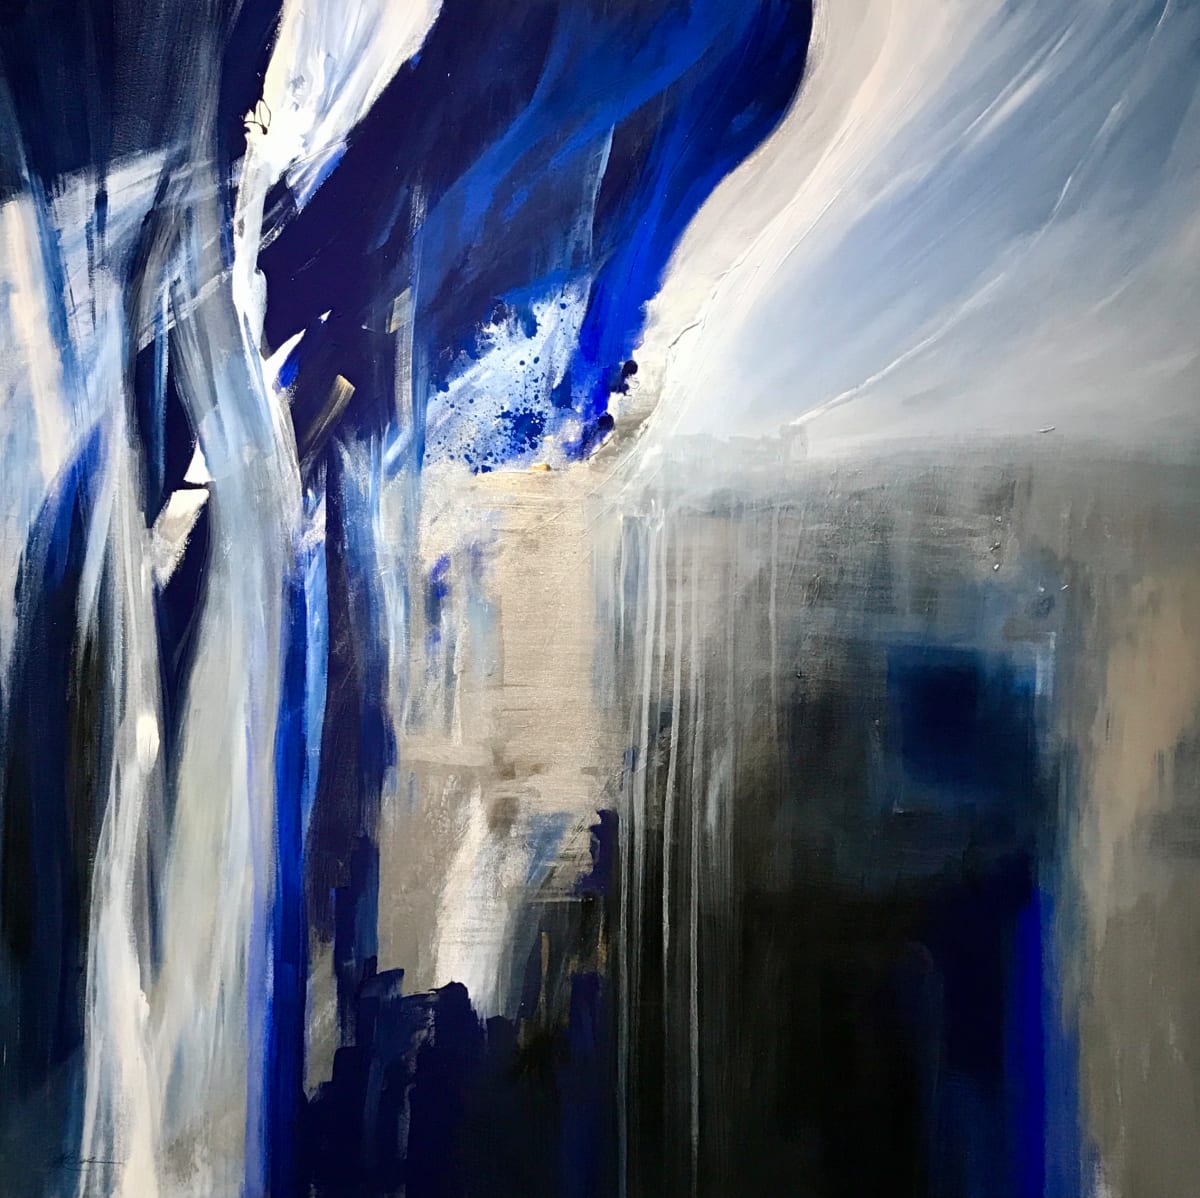 Dancing to Light by Julia Ross  Image: Part of the "Light" series, this abstract work pits bold color against soft tones of white and silver to create a memorable interplay of light and shadow.